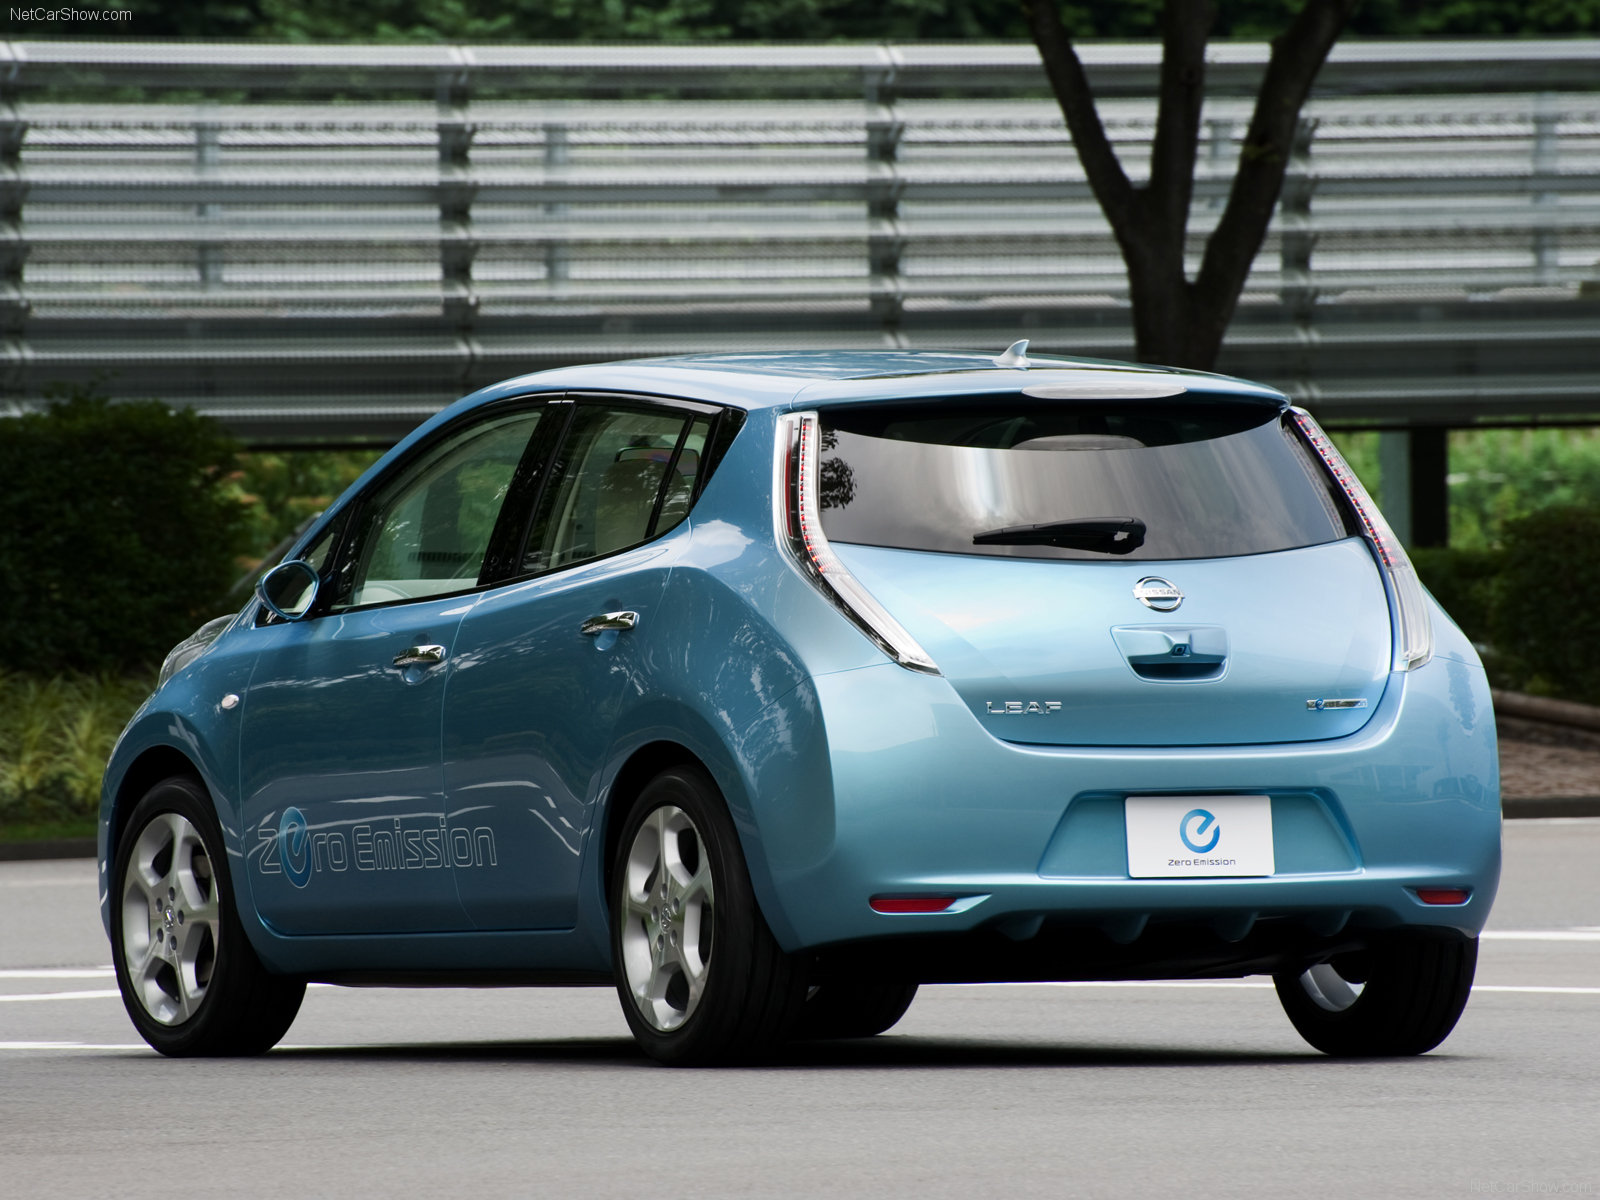 Nissan leaf picture gallery #3